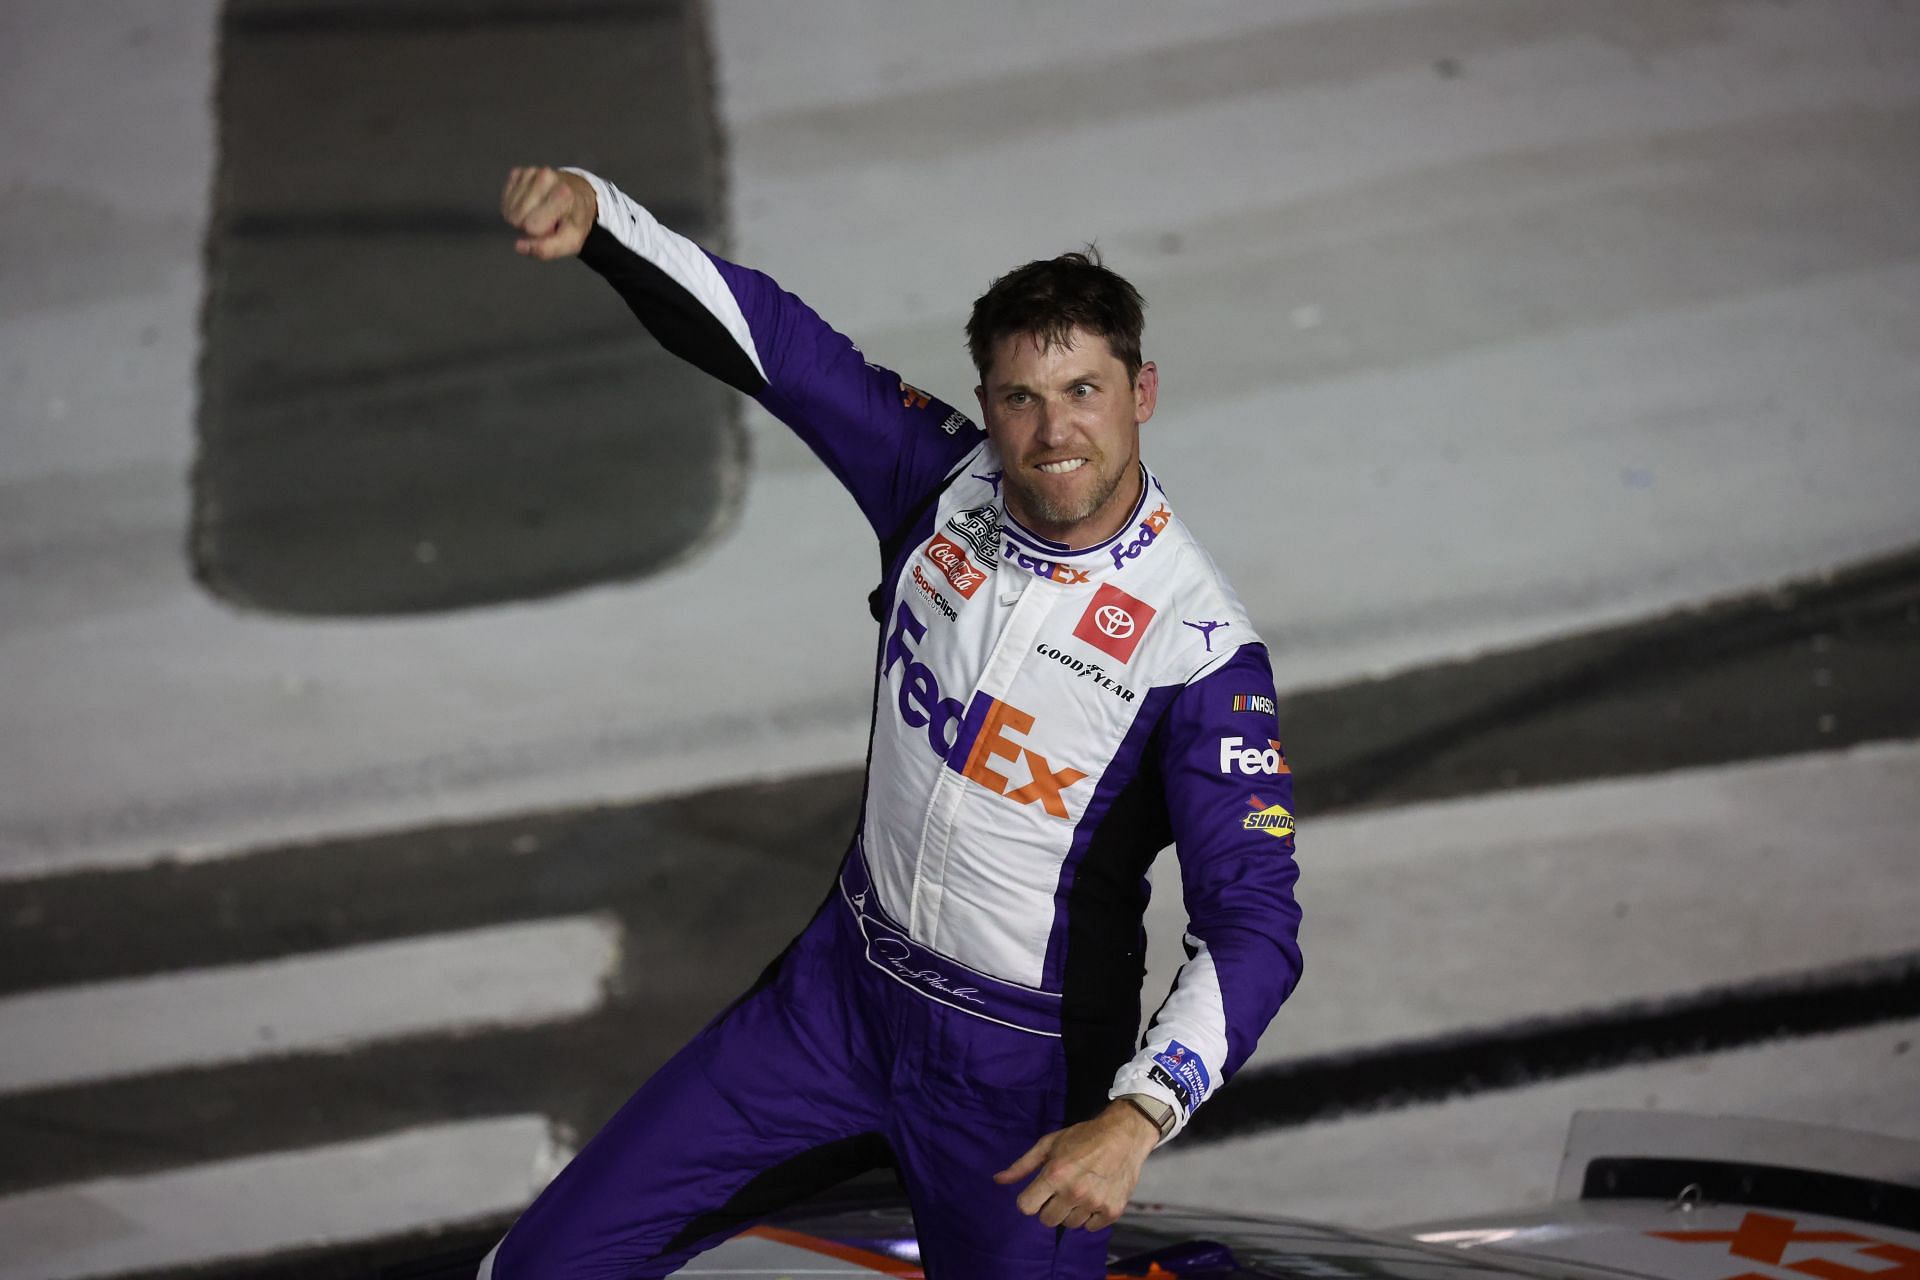 Denny Hamlin celebrates after winning the NASCAR Cup Series Coca-Cola 600 at Charlotte Motor Speedway. (Photo by James Gilbert/Getty Images)